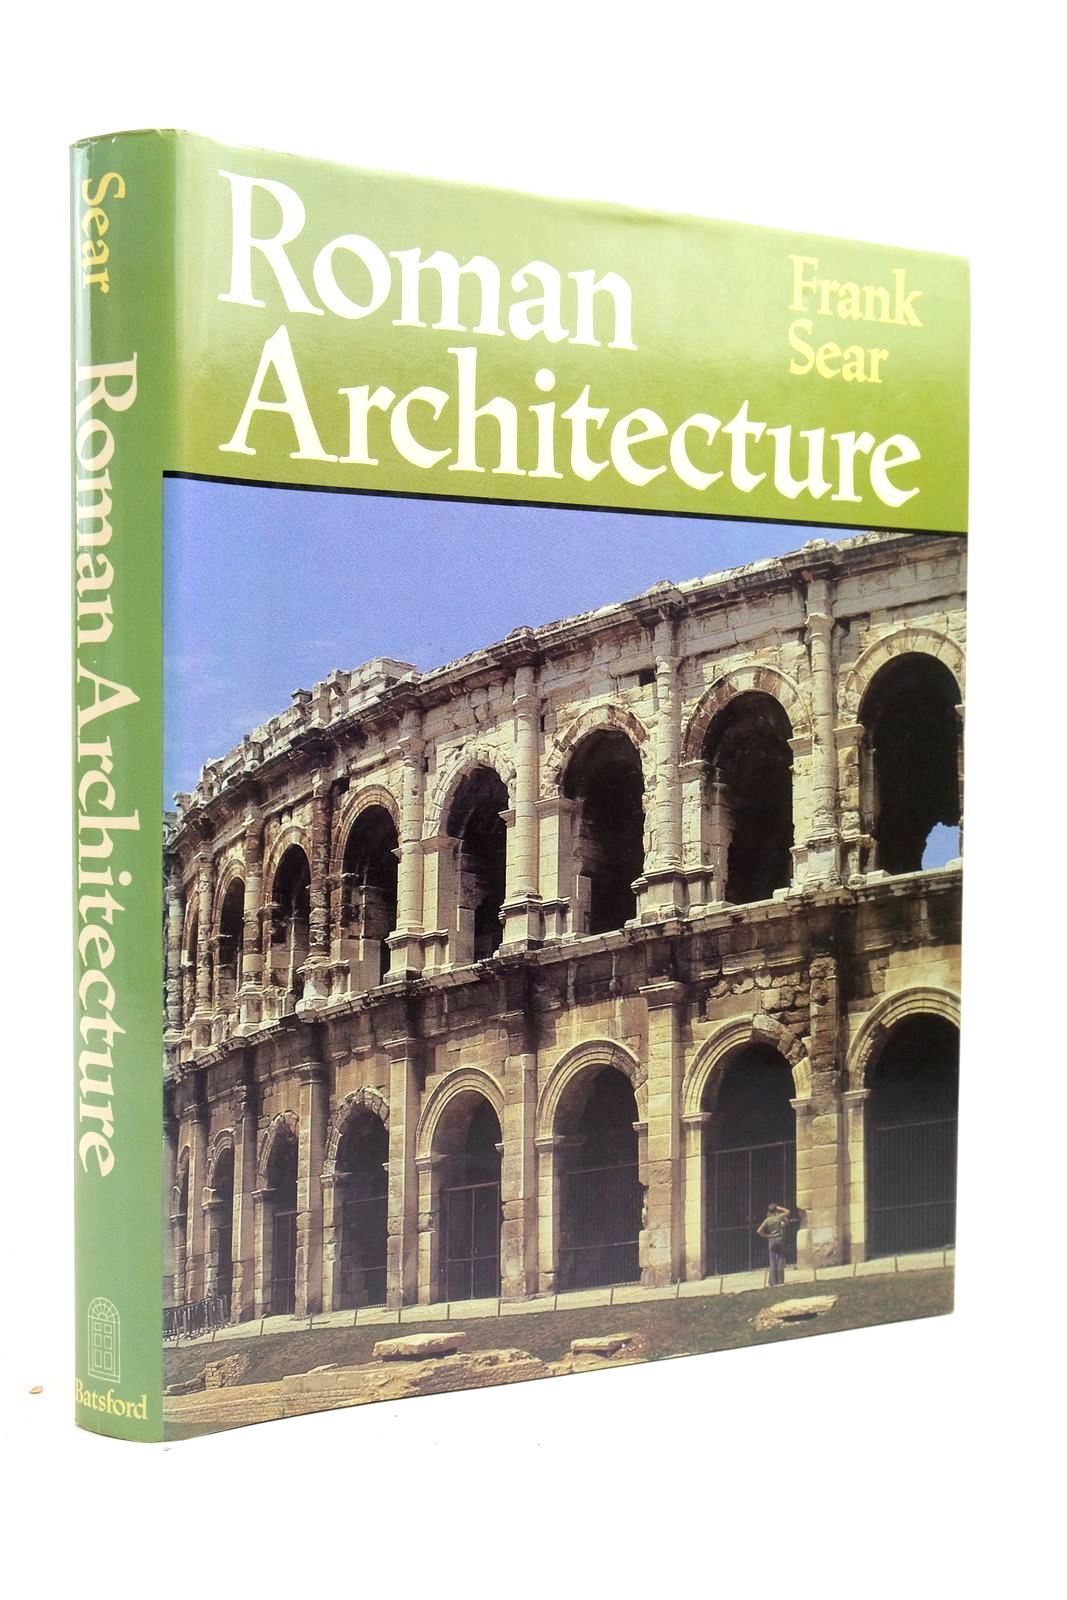 Photo of ROMAN ARCHITECTURE written by Sear, Frank published by Batsford Academic and Educational Ltd. (STOCK CODE: 2134771)  for sale by Stella & Rose's Books